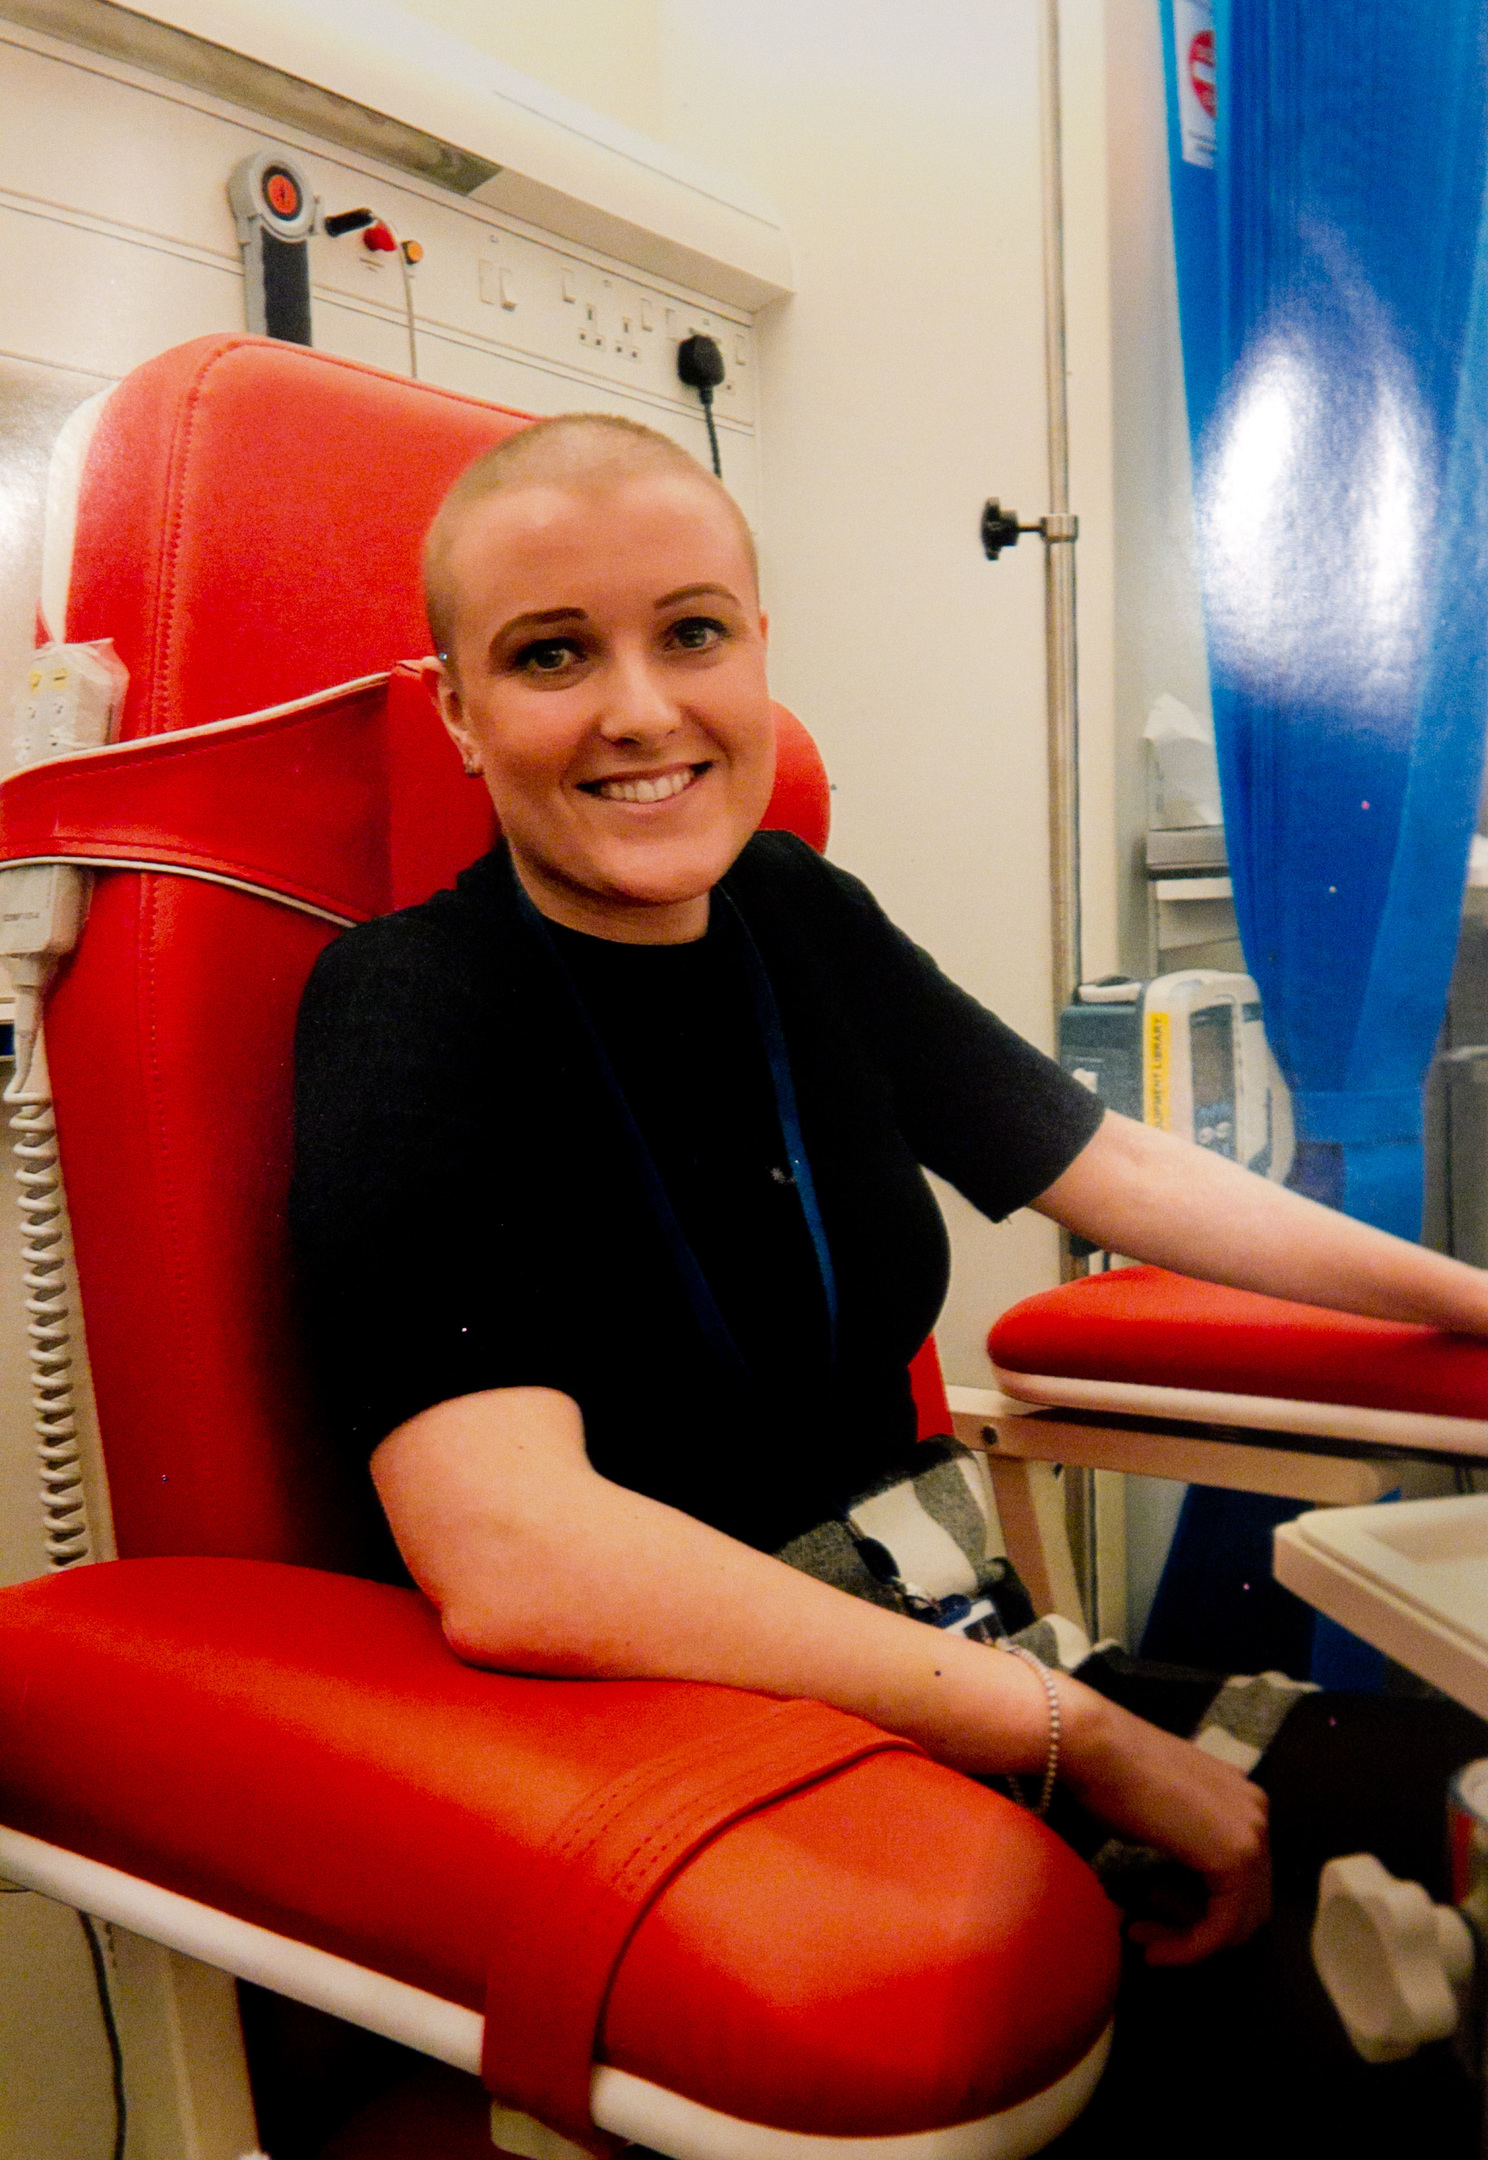 Mandie at hospital undergoing chemotherapy (Andrew Cawley/DC Thomson)